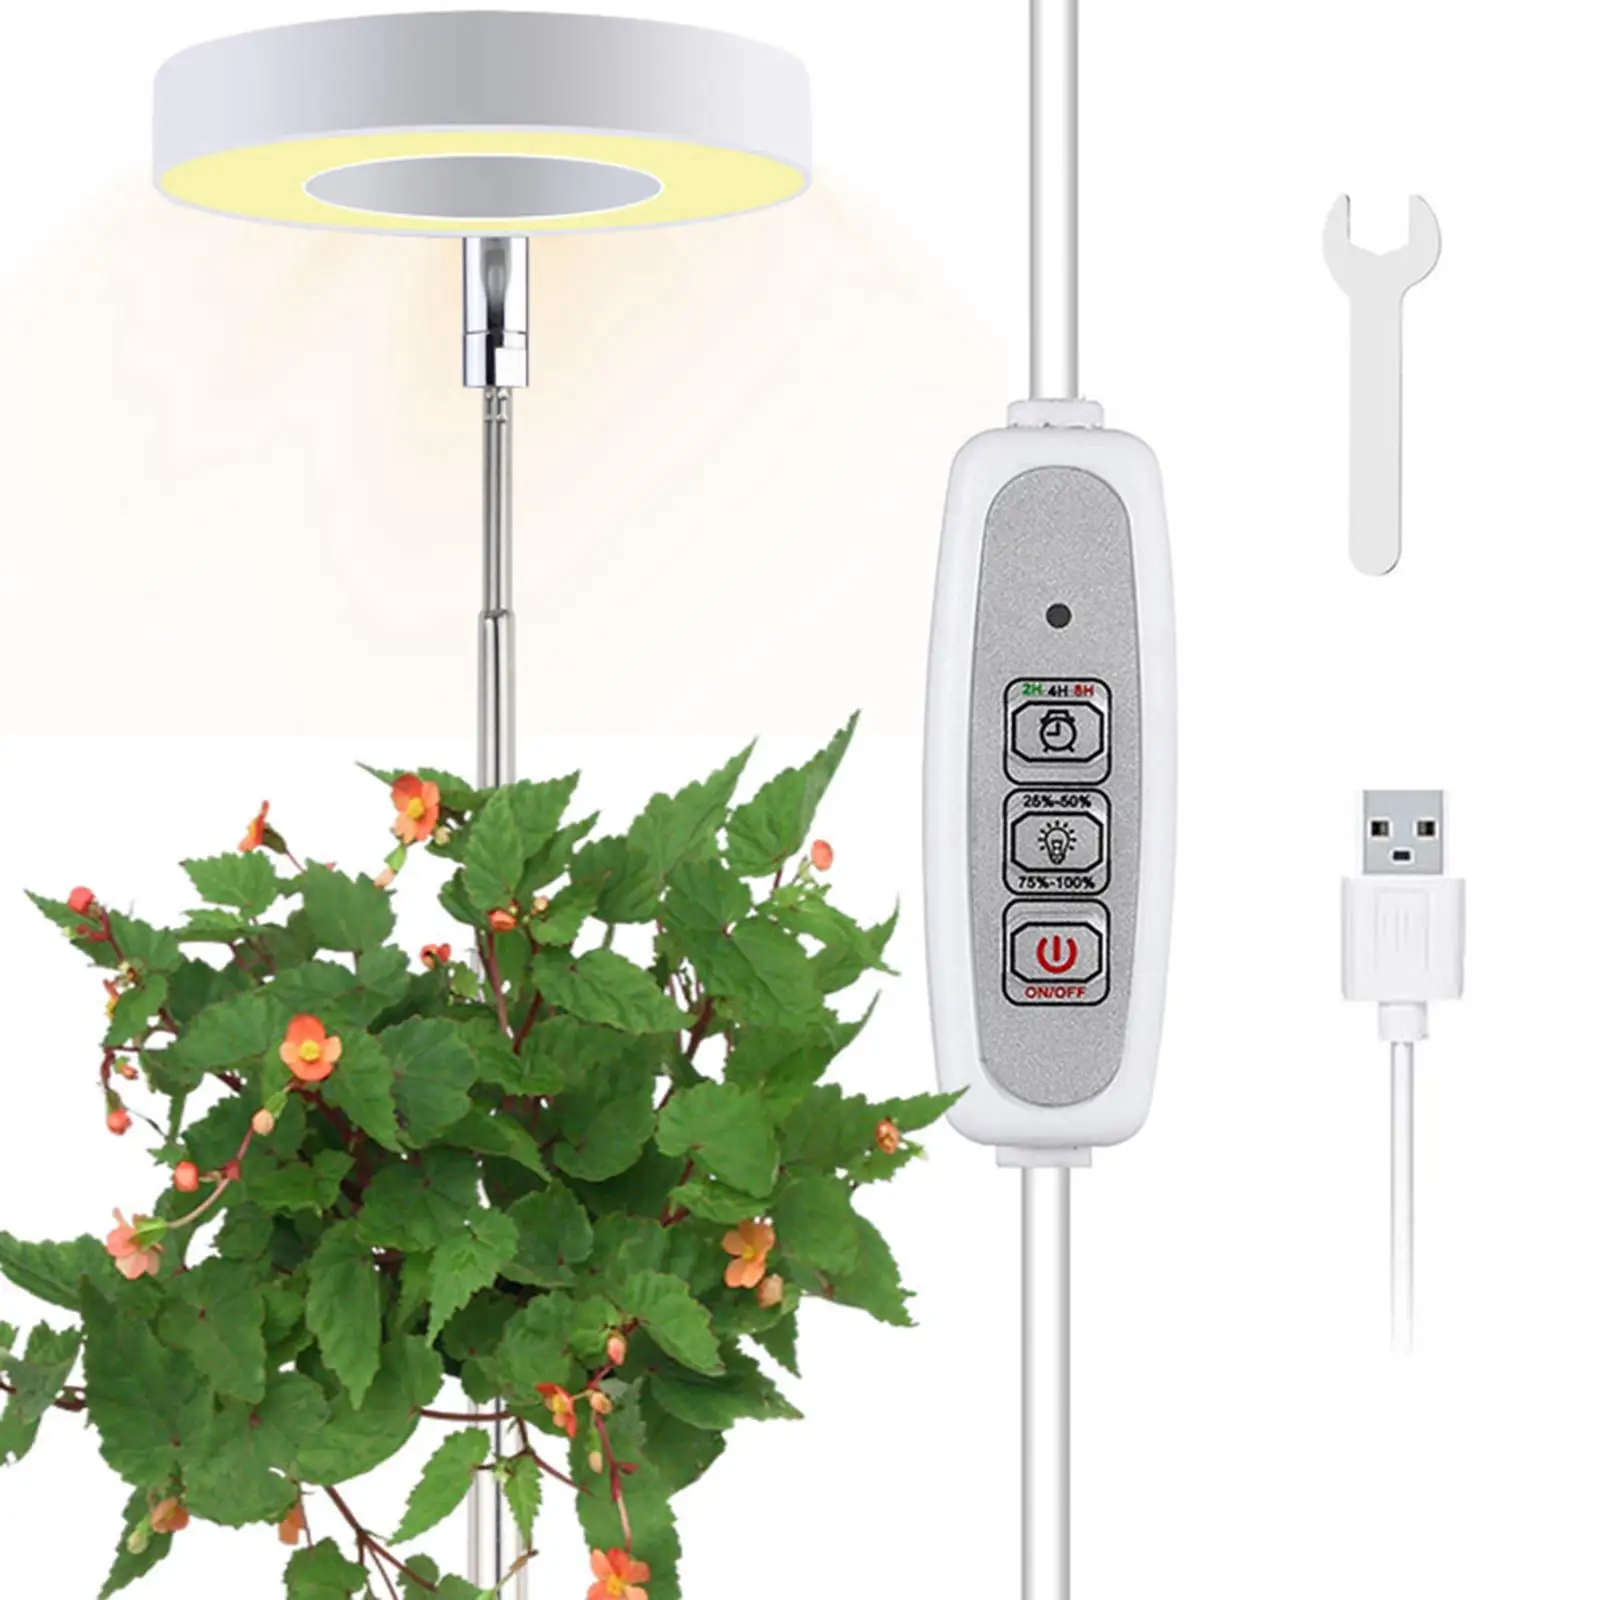 LED Grow Light 4 Dimmable Levels 4/8/12H Timer Full Spectrum Grow Lamp Height Adjustable for Indoor Plants Veg Flower Succulents